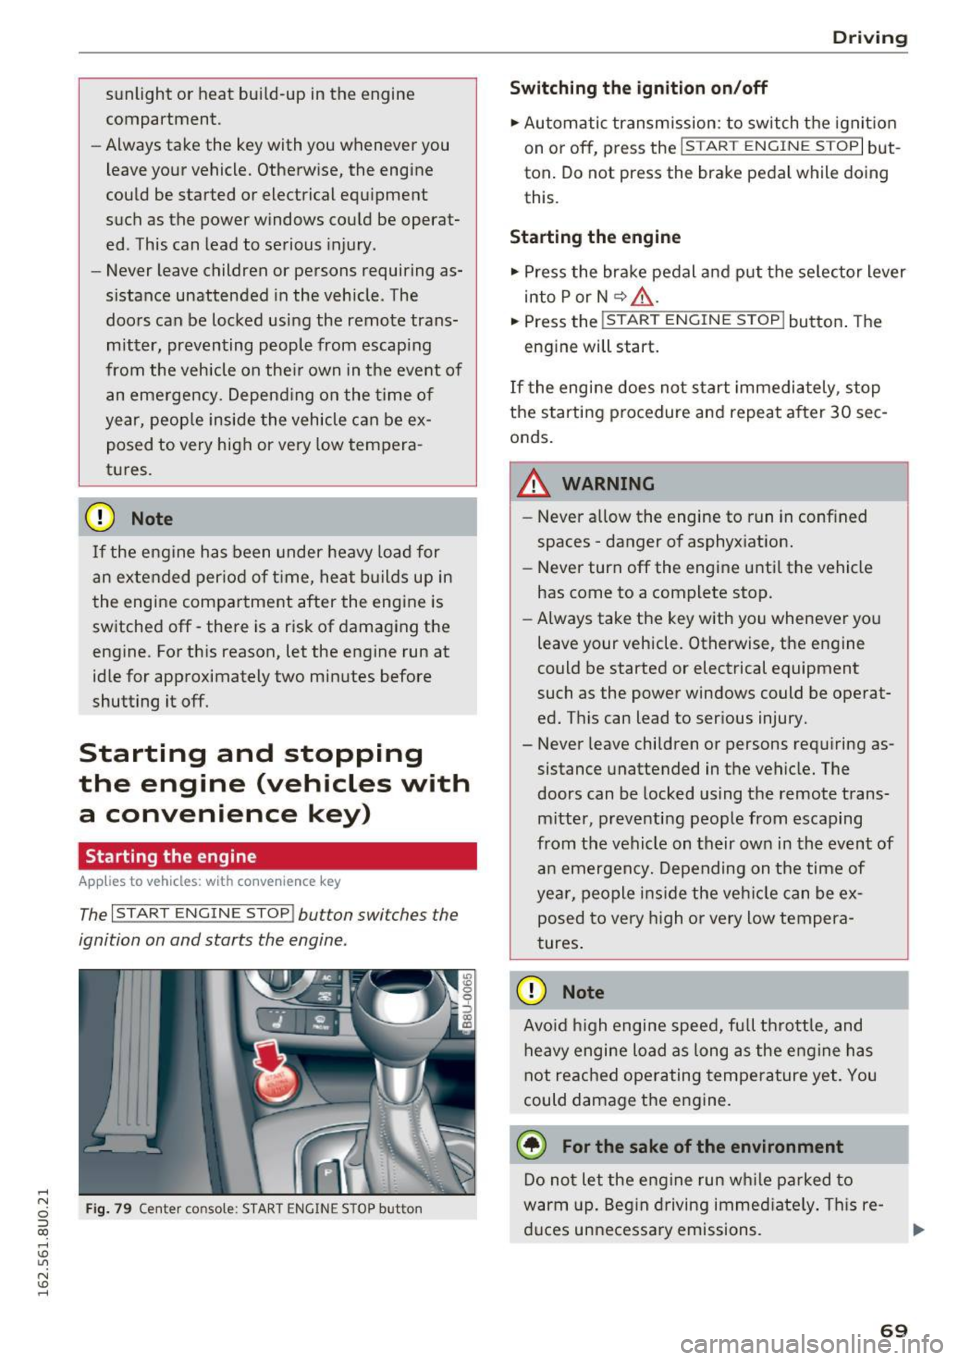 AUDI Q3 2016  Owners Manual .... N 
c:i ::J CX) 
.... I.Cl U"I 
N I.Cl .... 
sunlight  or  heat  build-up  in the engine 
compartment. 
- Always  take  the  key with  you  whenever  you 
leave  your  vehicle. Otherwise,  the  en